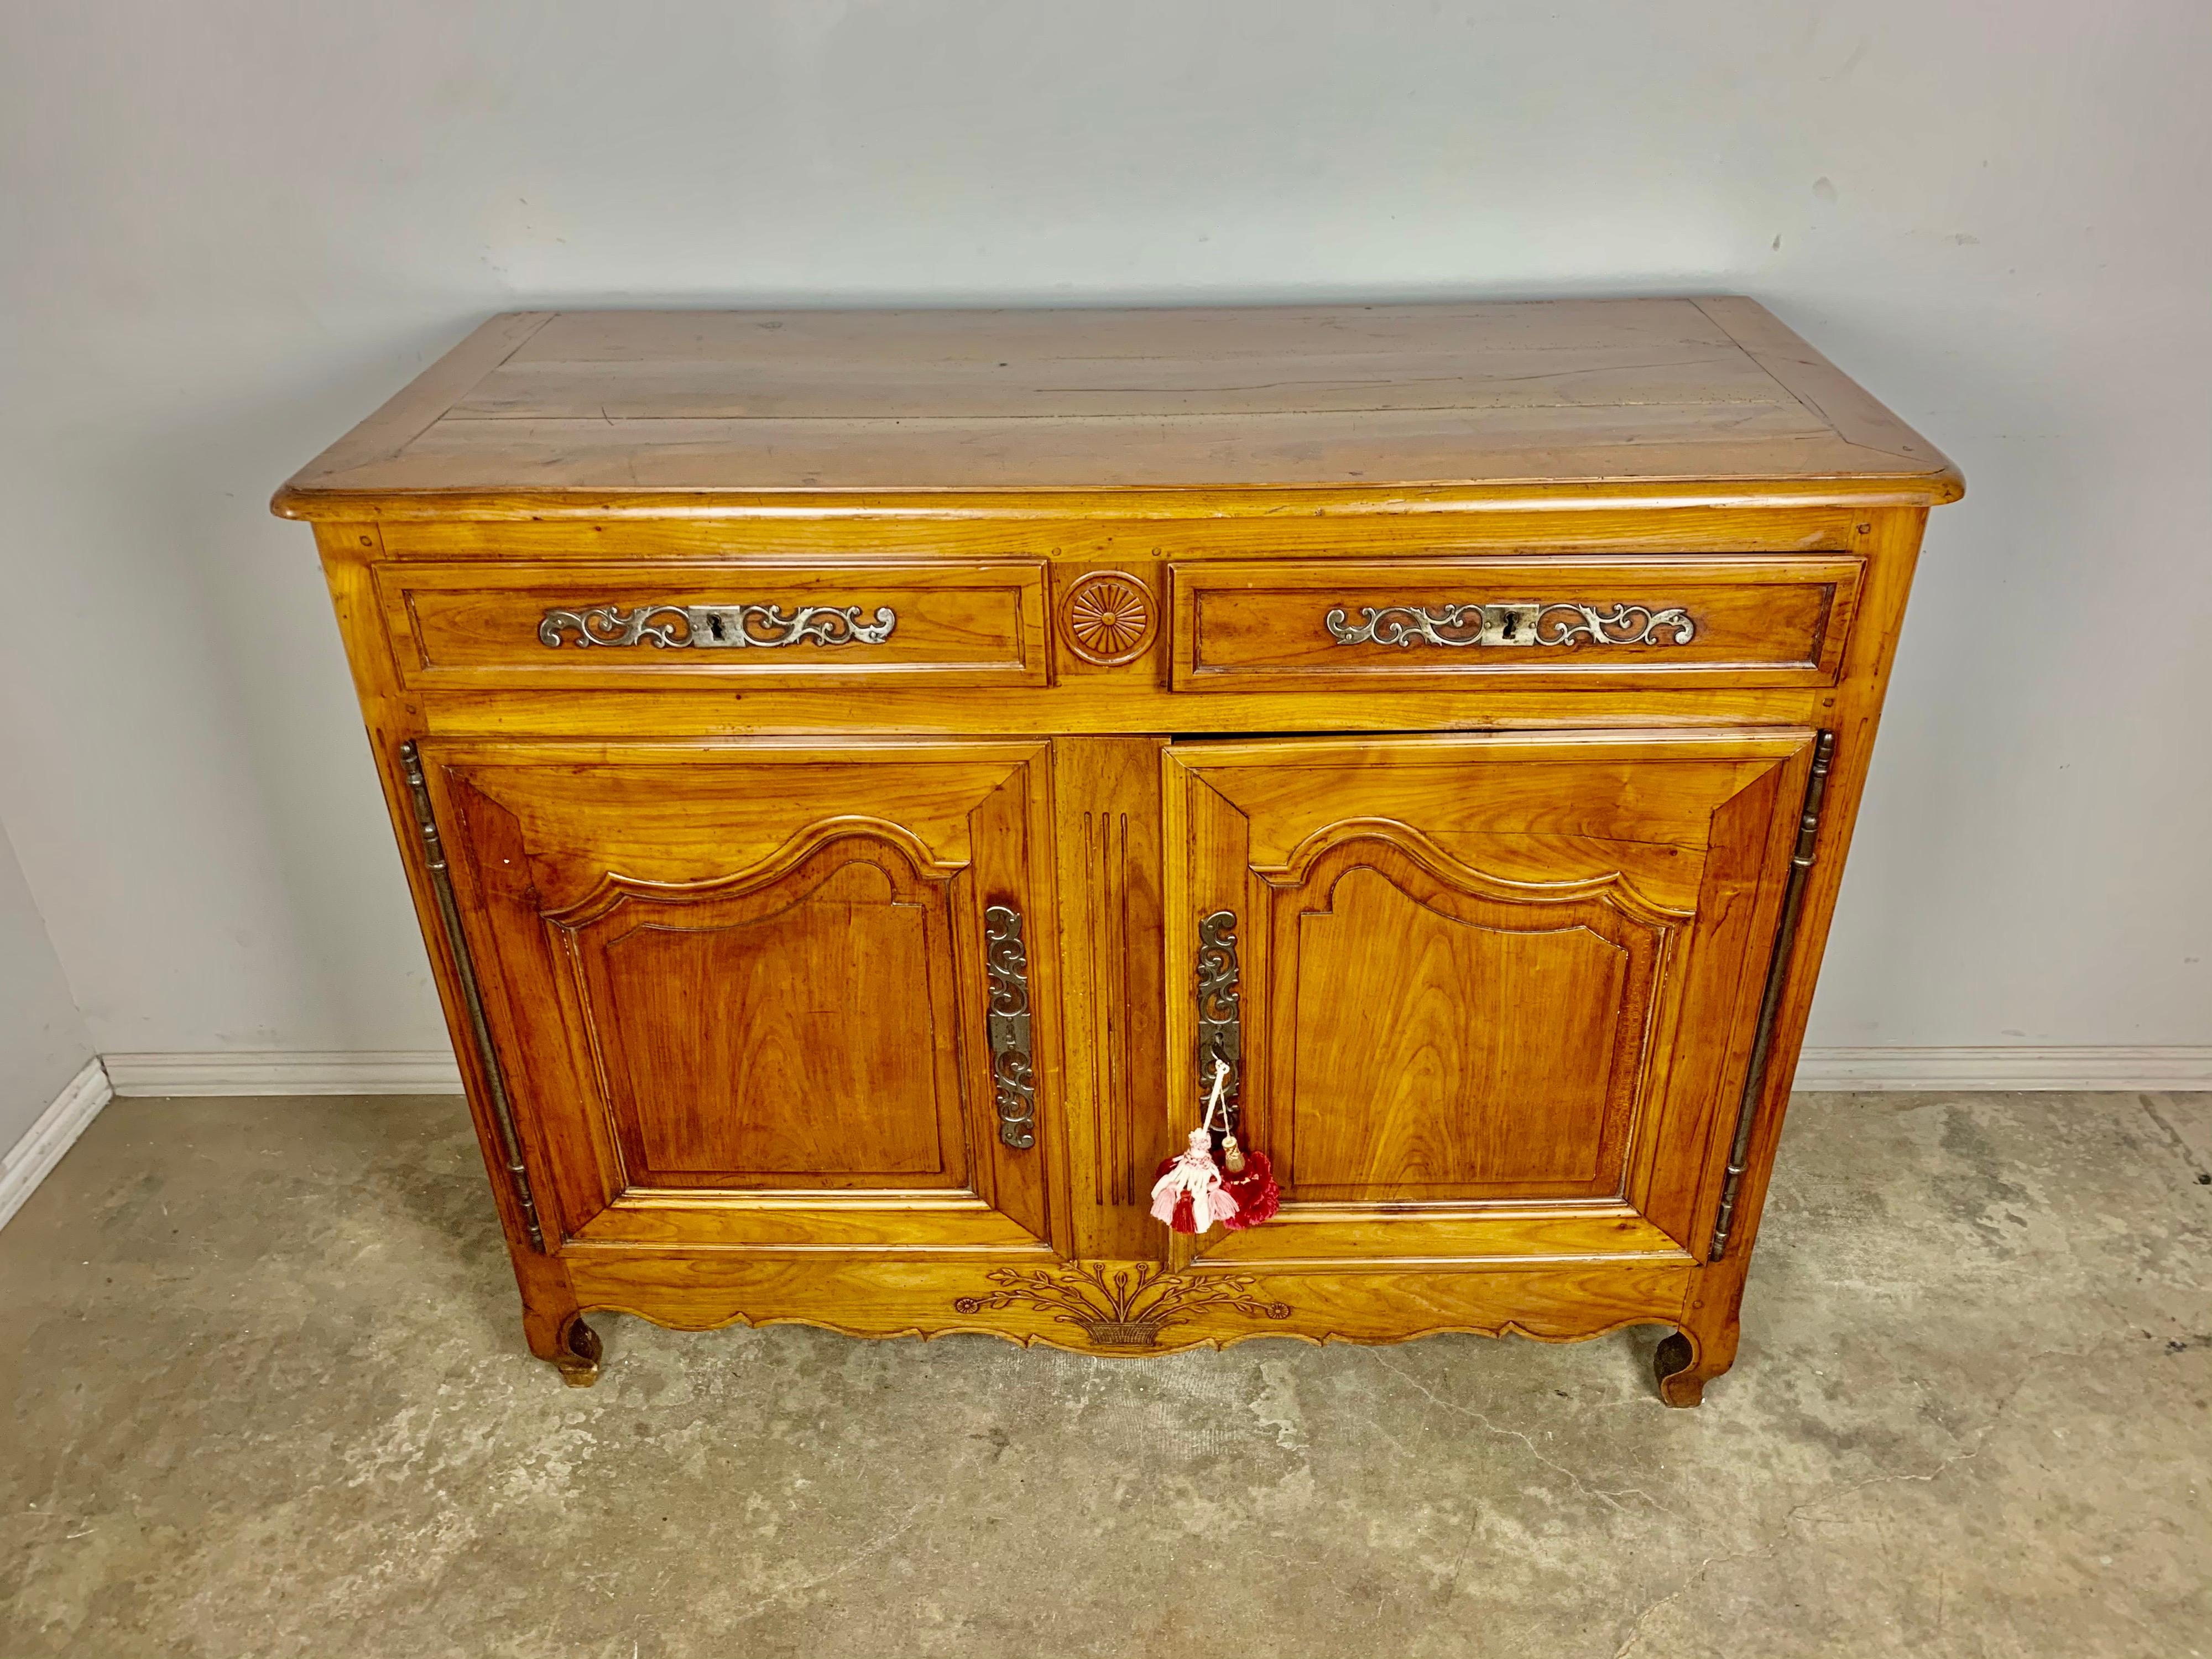 19th century French cherrywood buffet with beautiful patina. The piece has two doors and two drawers for plenty of storage. Original pewter hardware. The piece stands on four cabriole shaped legs and has a carved urn of flowers at bottom of buffet.